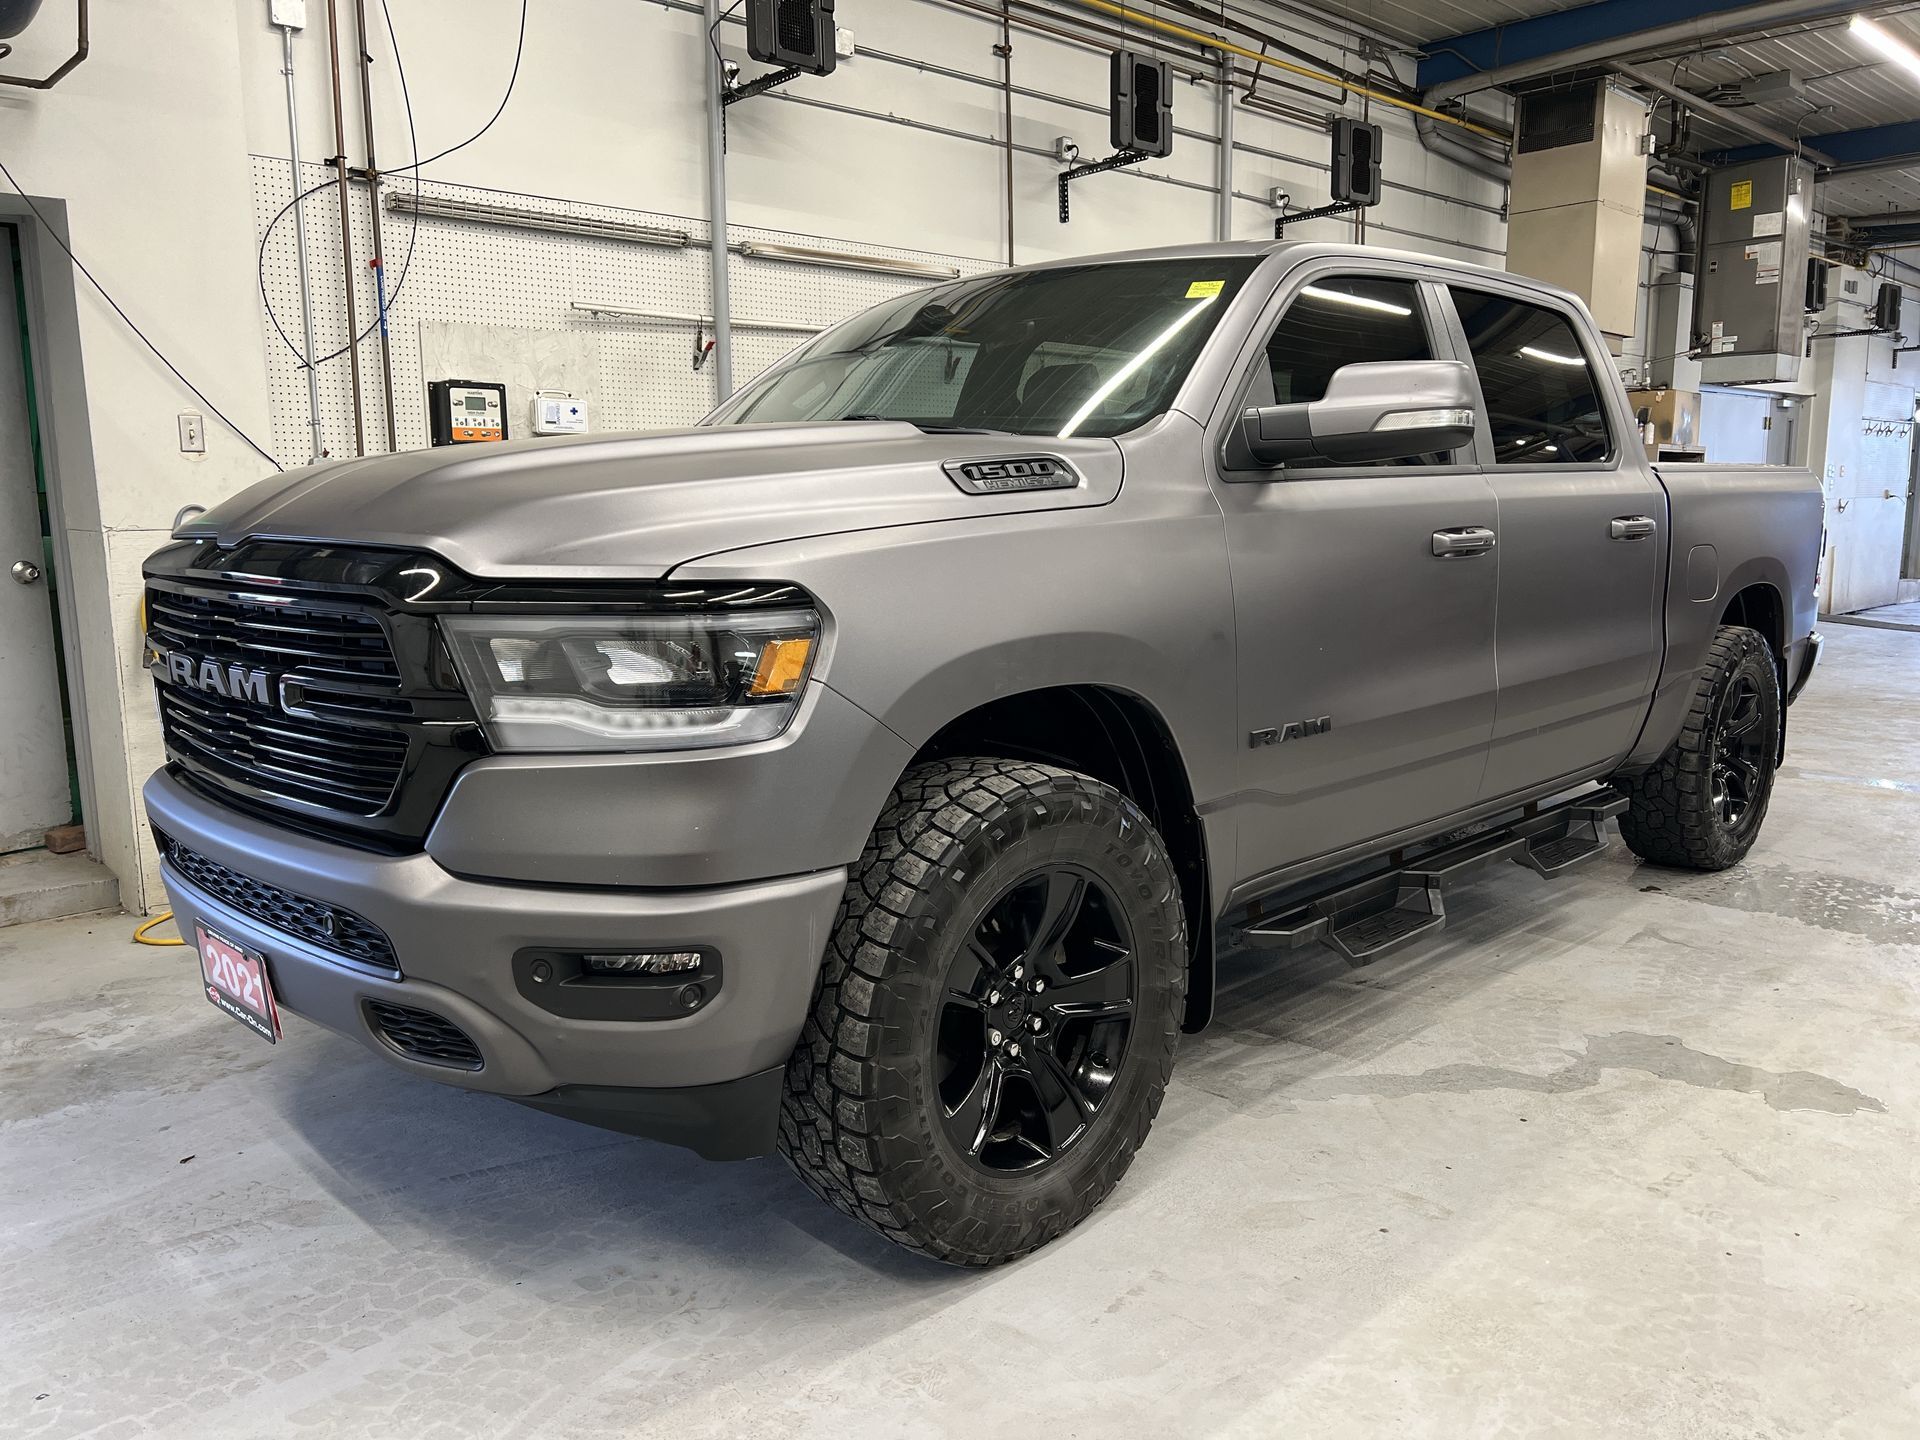 2021 Ram 1500 SPORT NIGHT 4x4 | PANO ROOF |LEATHER |12-IN SCREEN